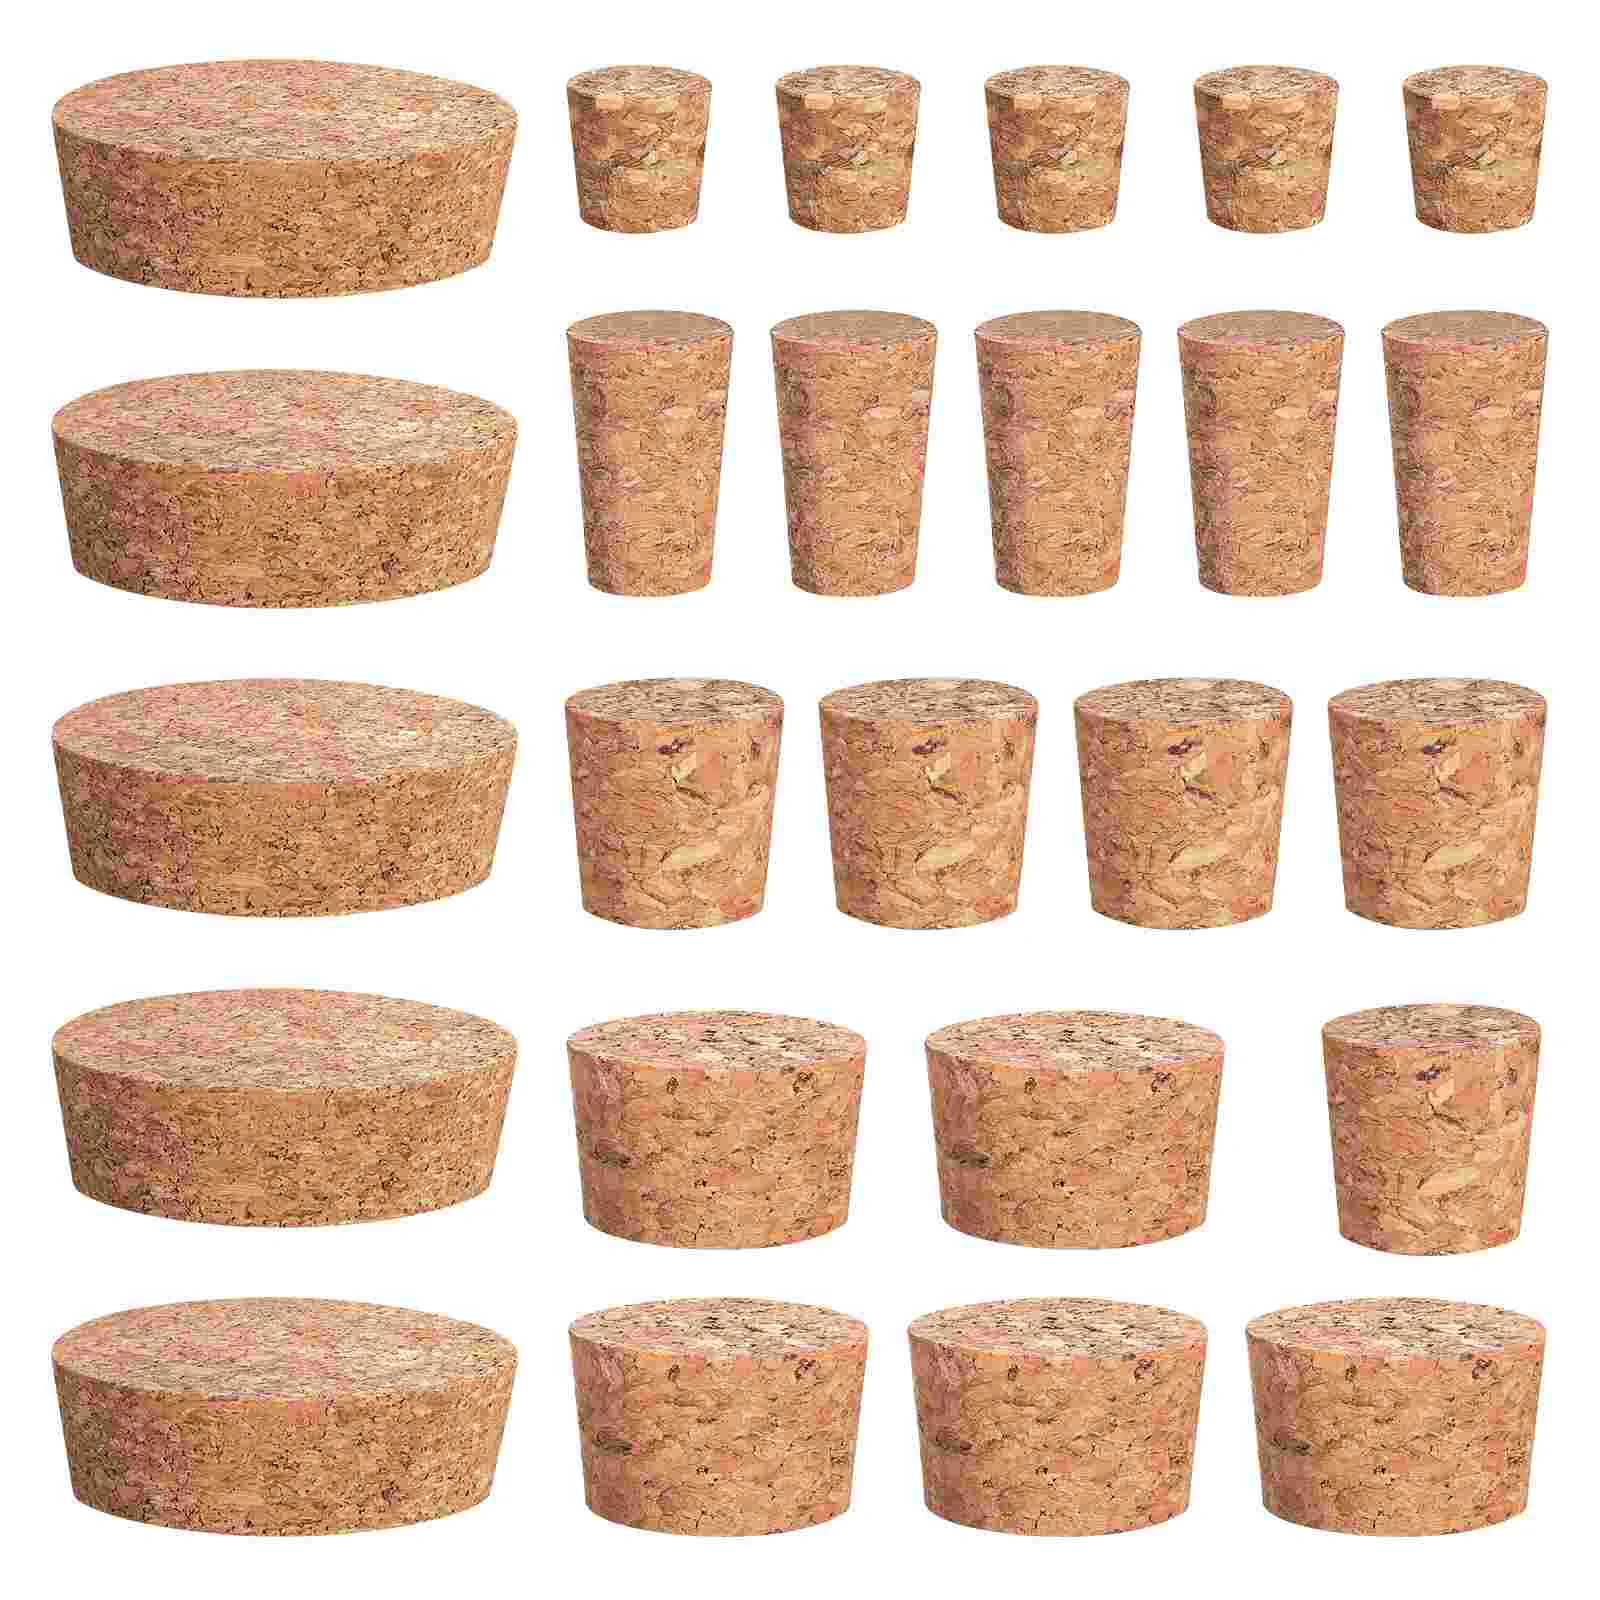 

Cork Tapered Stoppers Plugs Winebottle Restaurant Projects Craft Making Diy Stopper Beer Wood Corks Home Bar Replacement